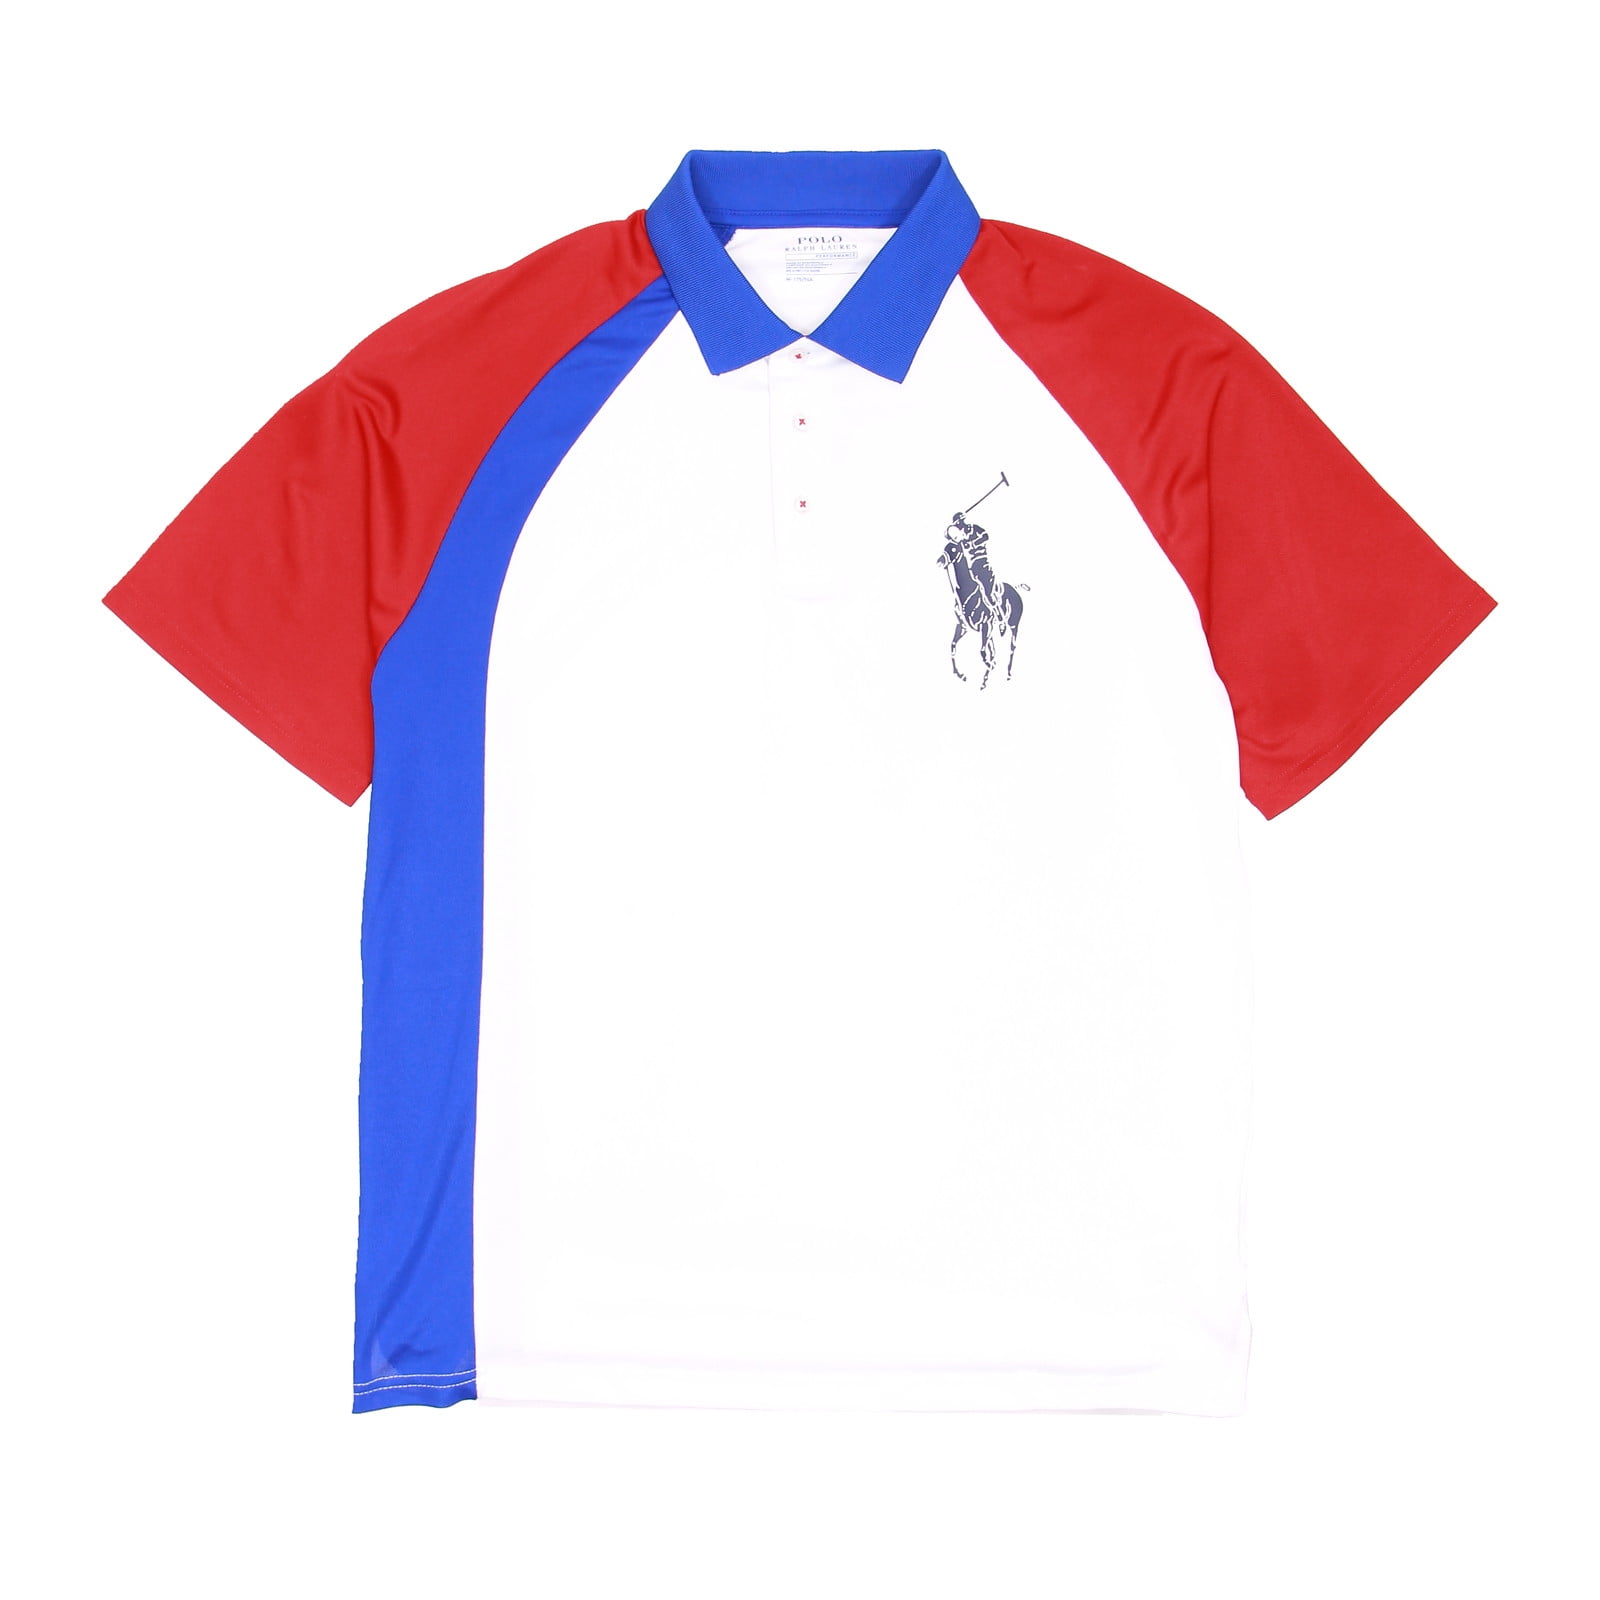 POLO Ralph Lauren Mens Color Block Polo Shirt (Large, Red/White/Blue) -  